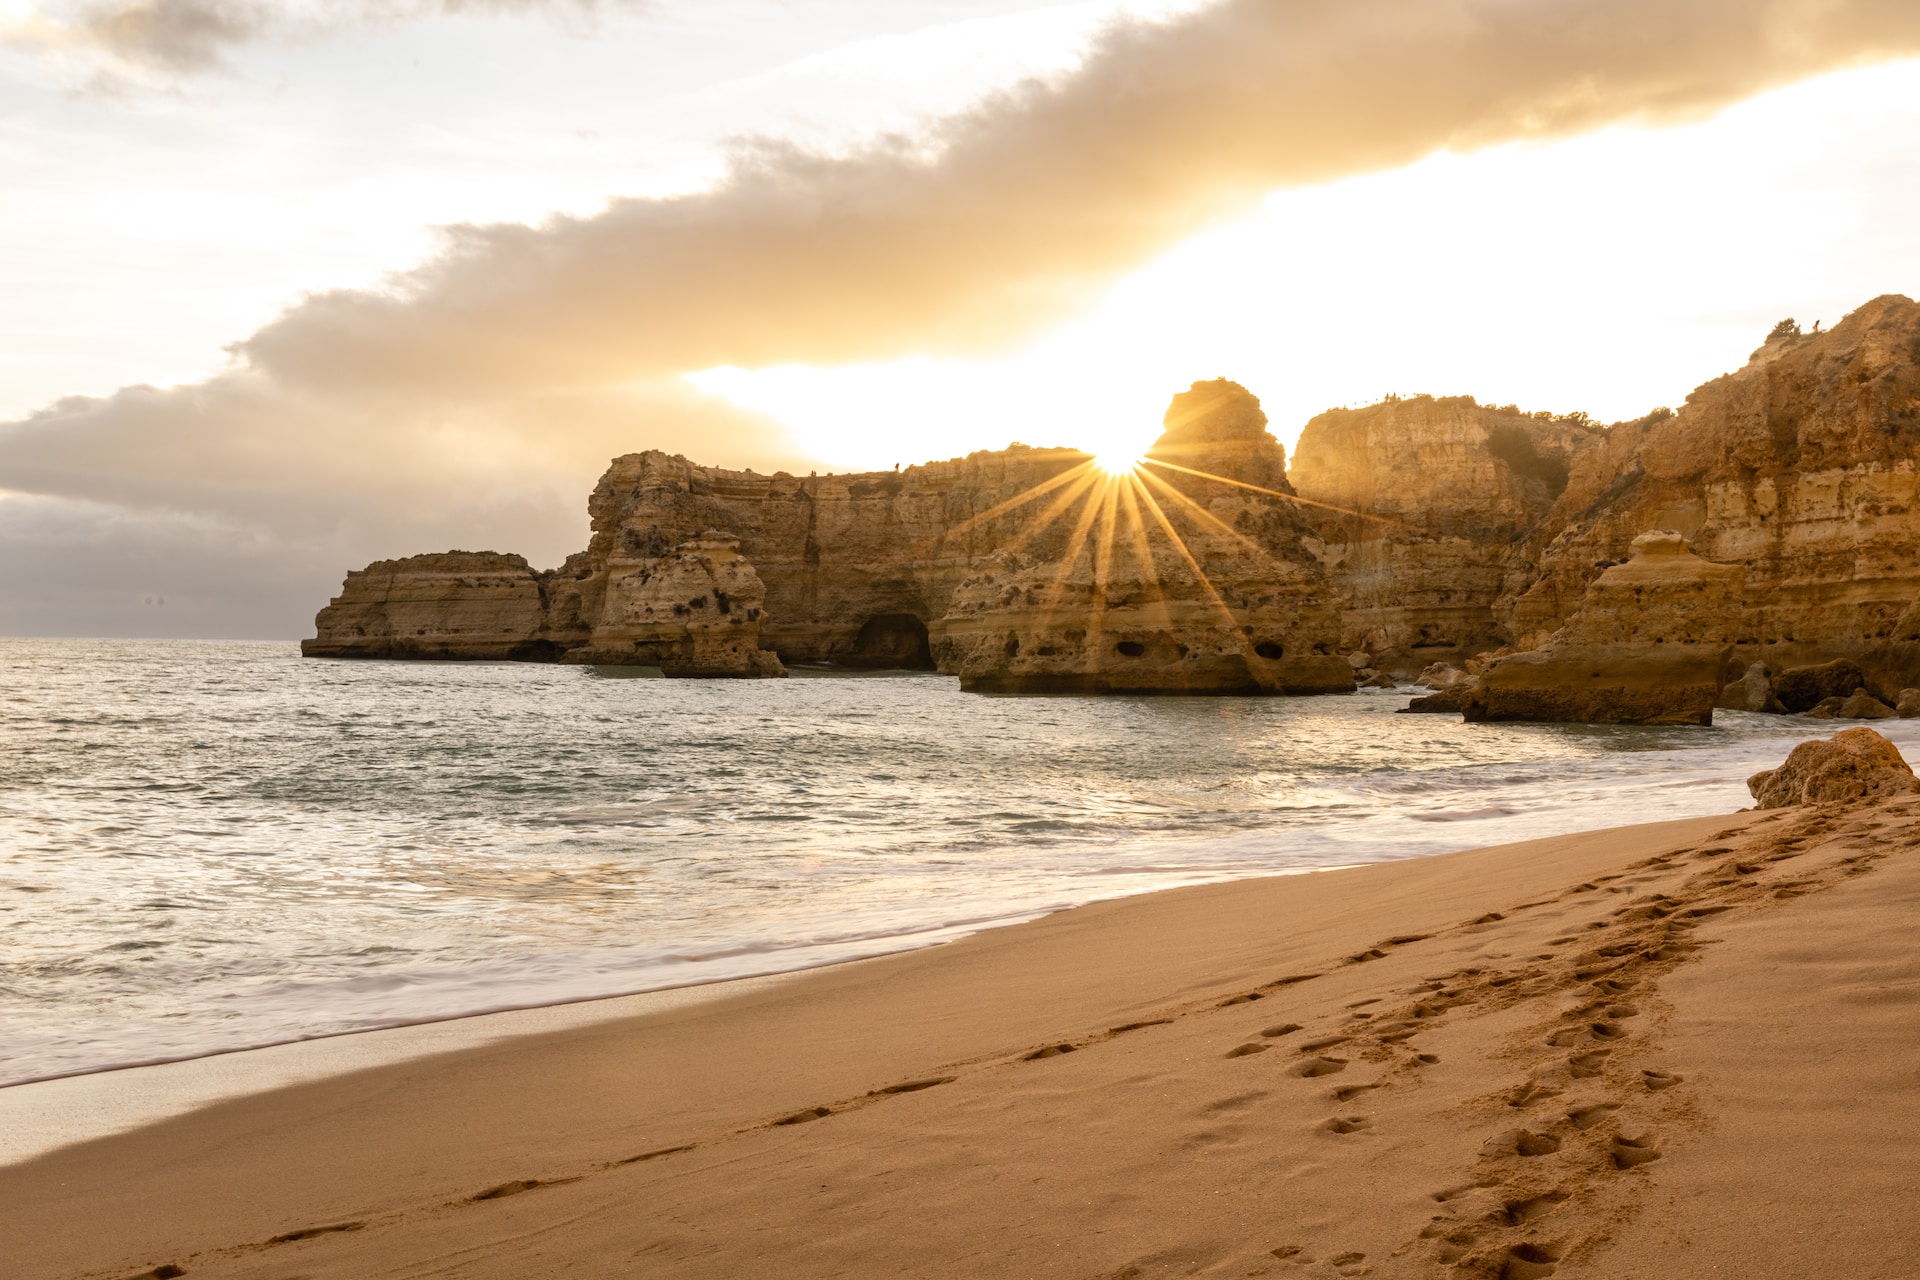 Algarve: 4 Vacation-Flavored Suggestions